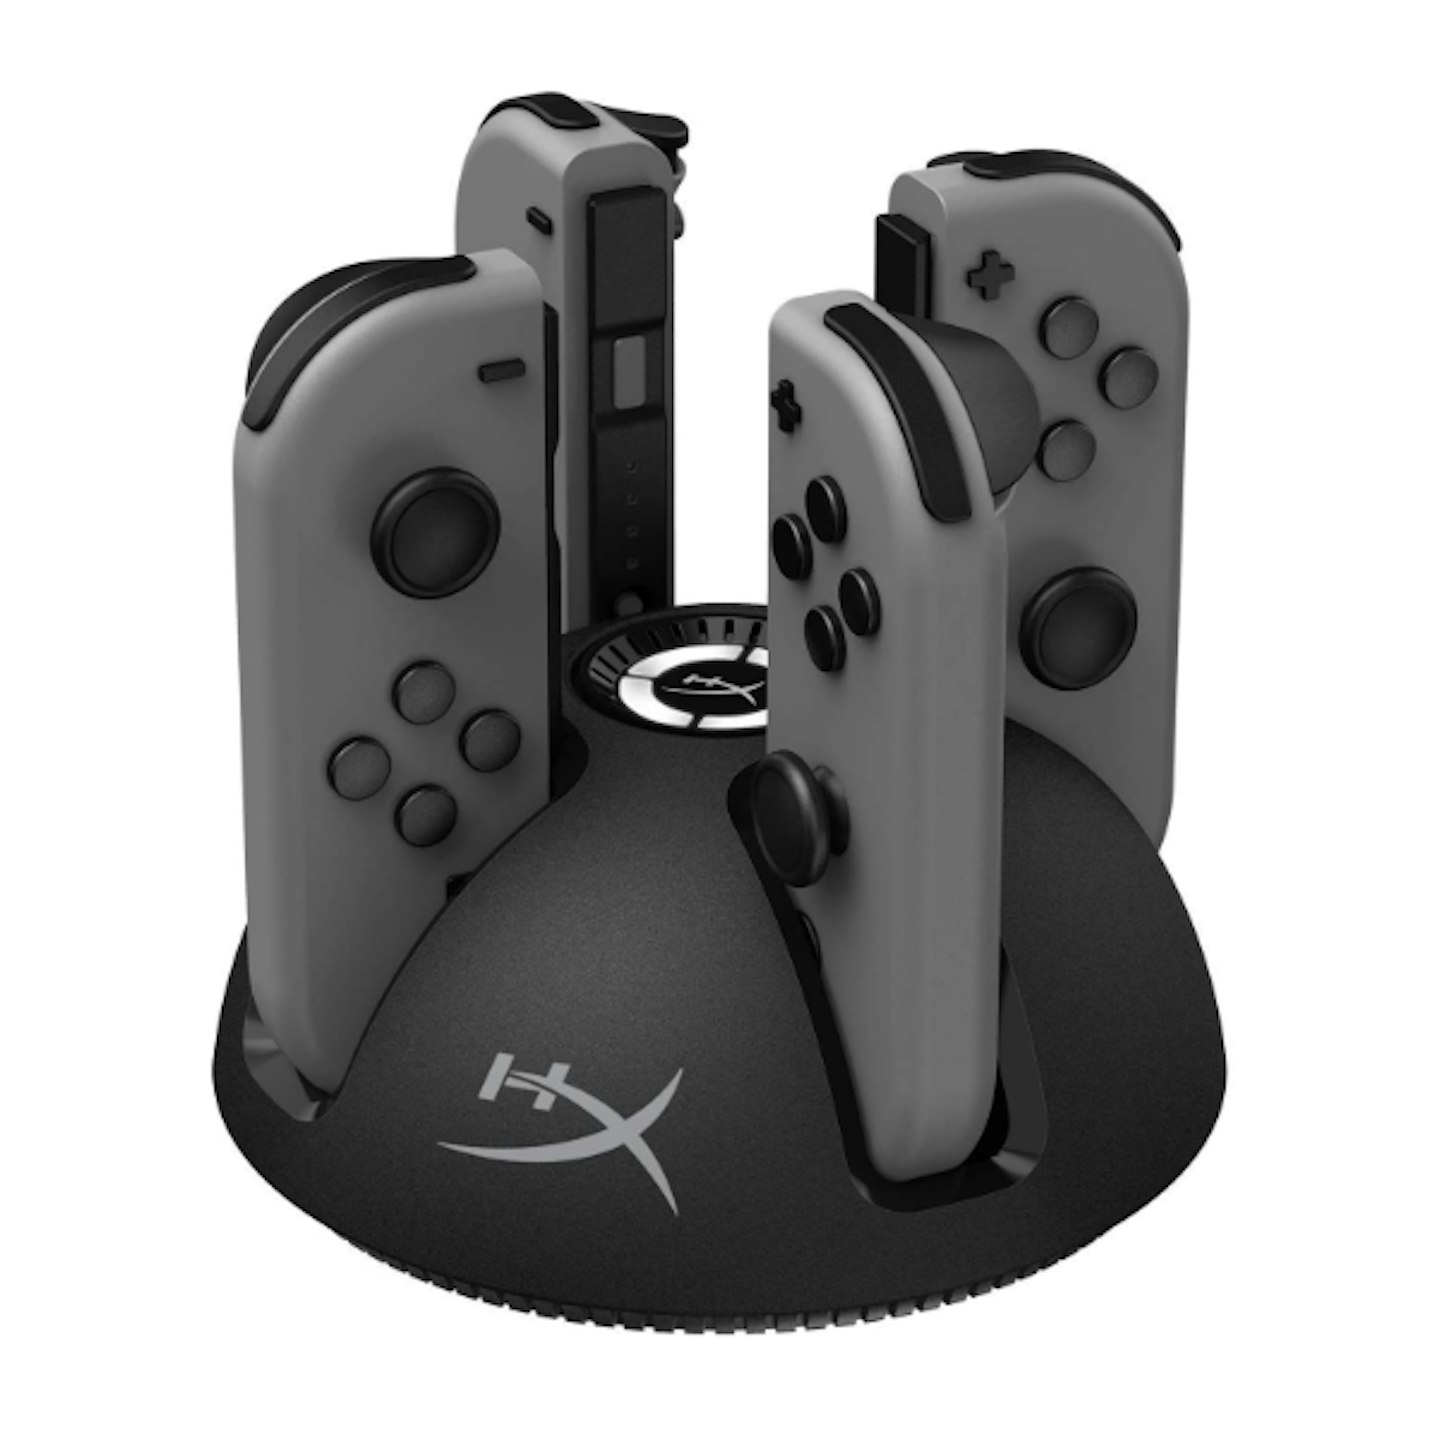 HyperX Switch Chargeplay Charging Dock, £19.99